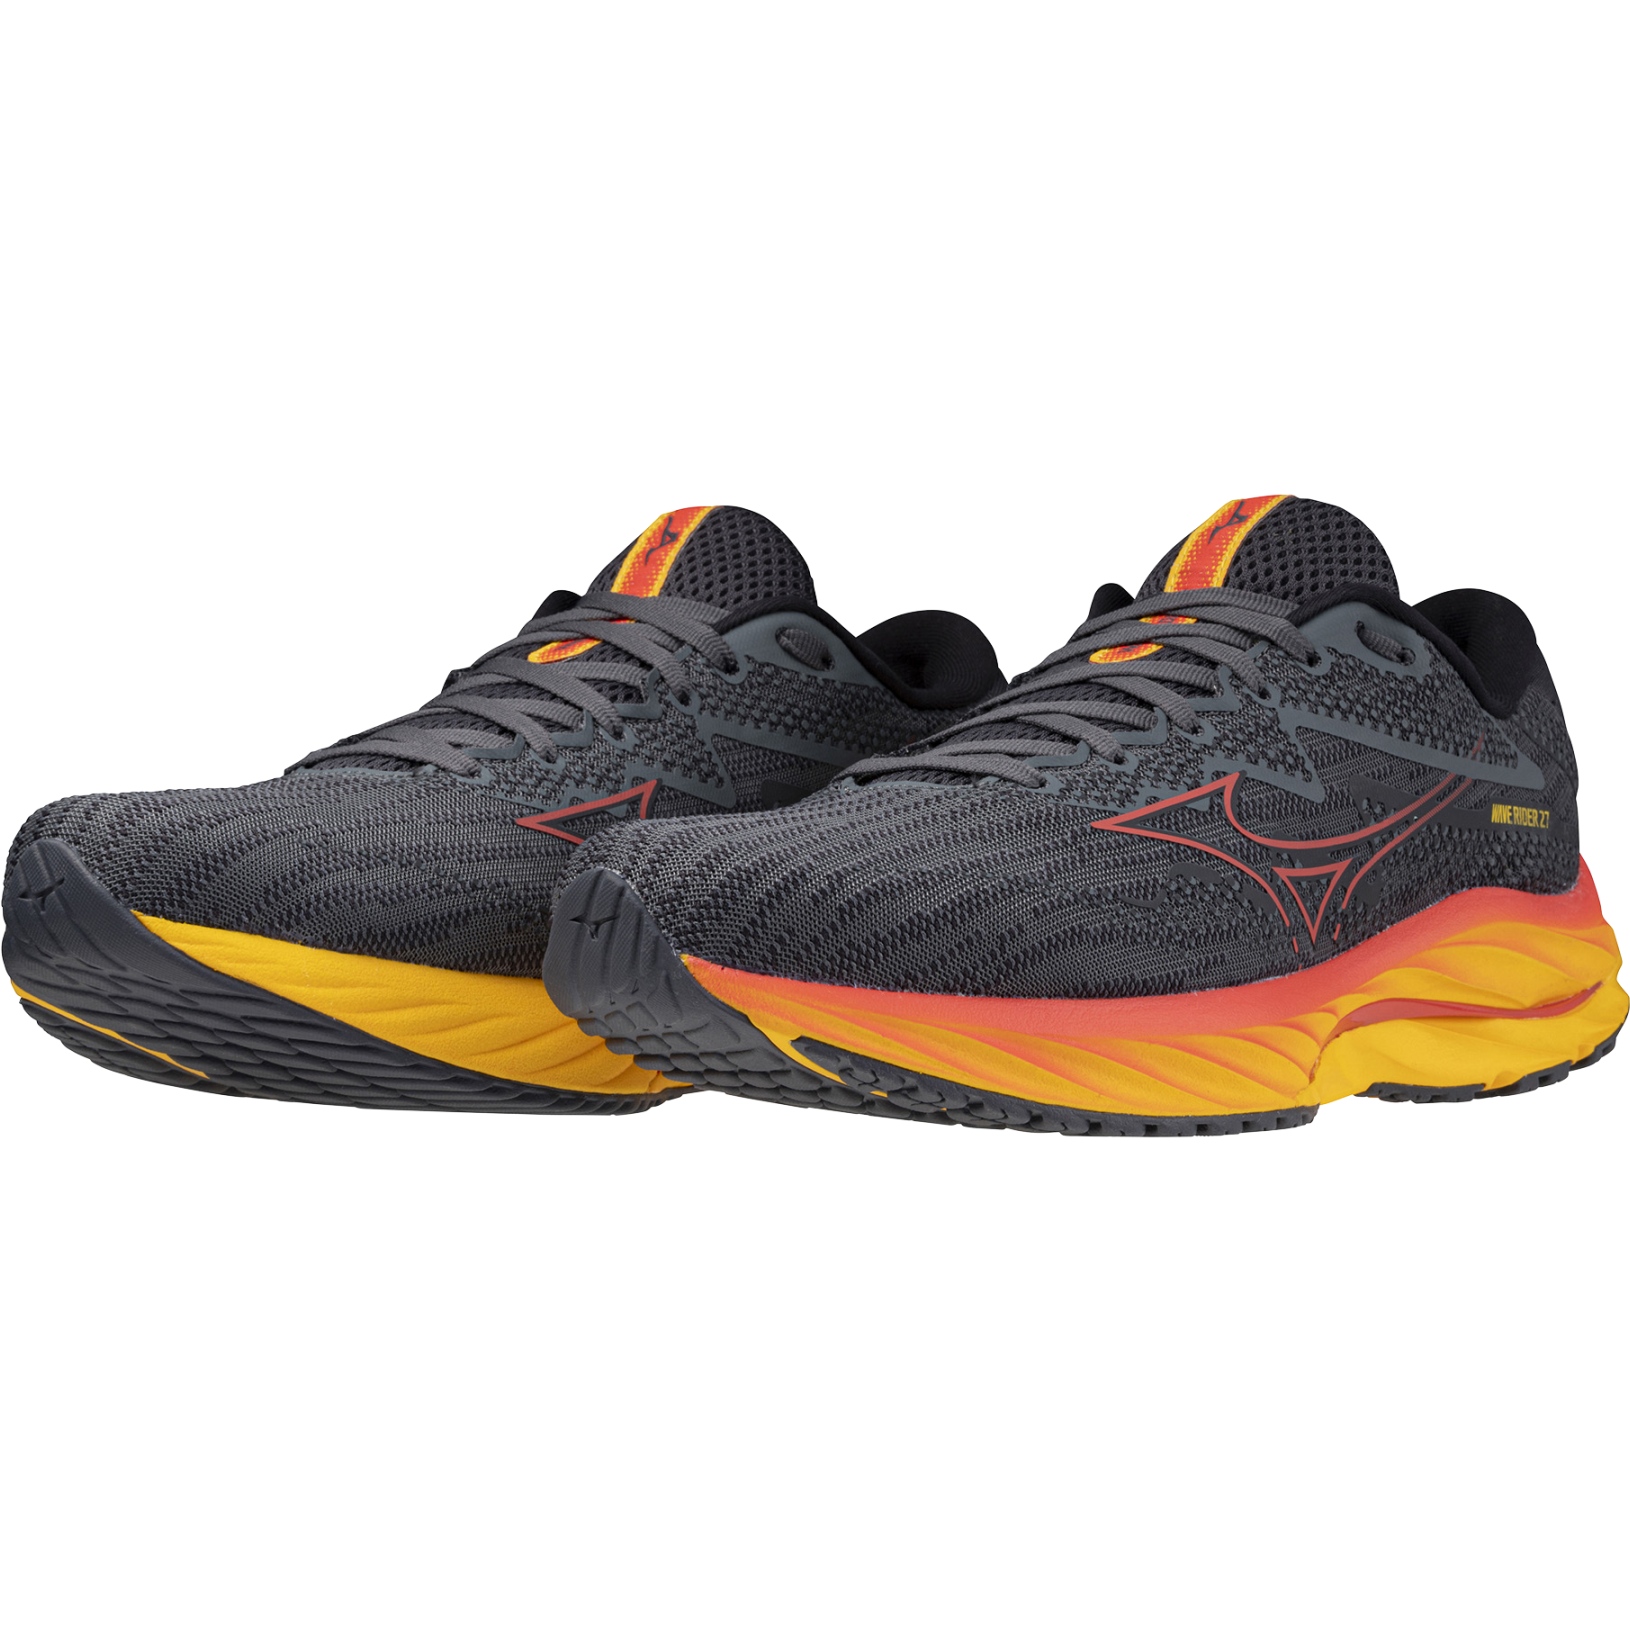 Picture of Mizuno Wave Rider 27 Running Shoes Men - Turbulence / Cayenne / Citrus